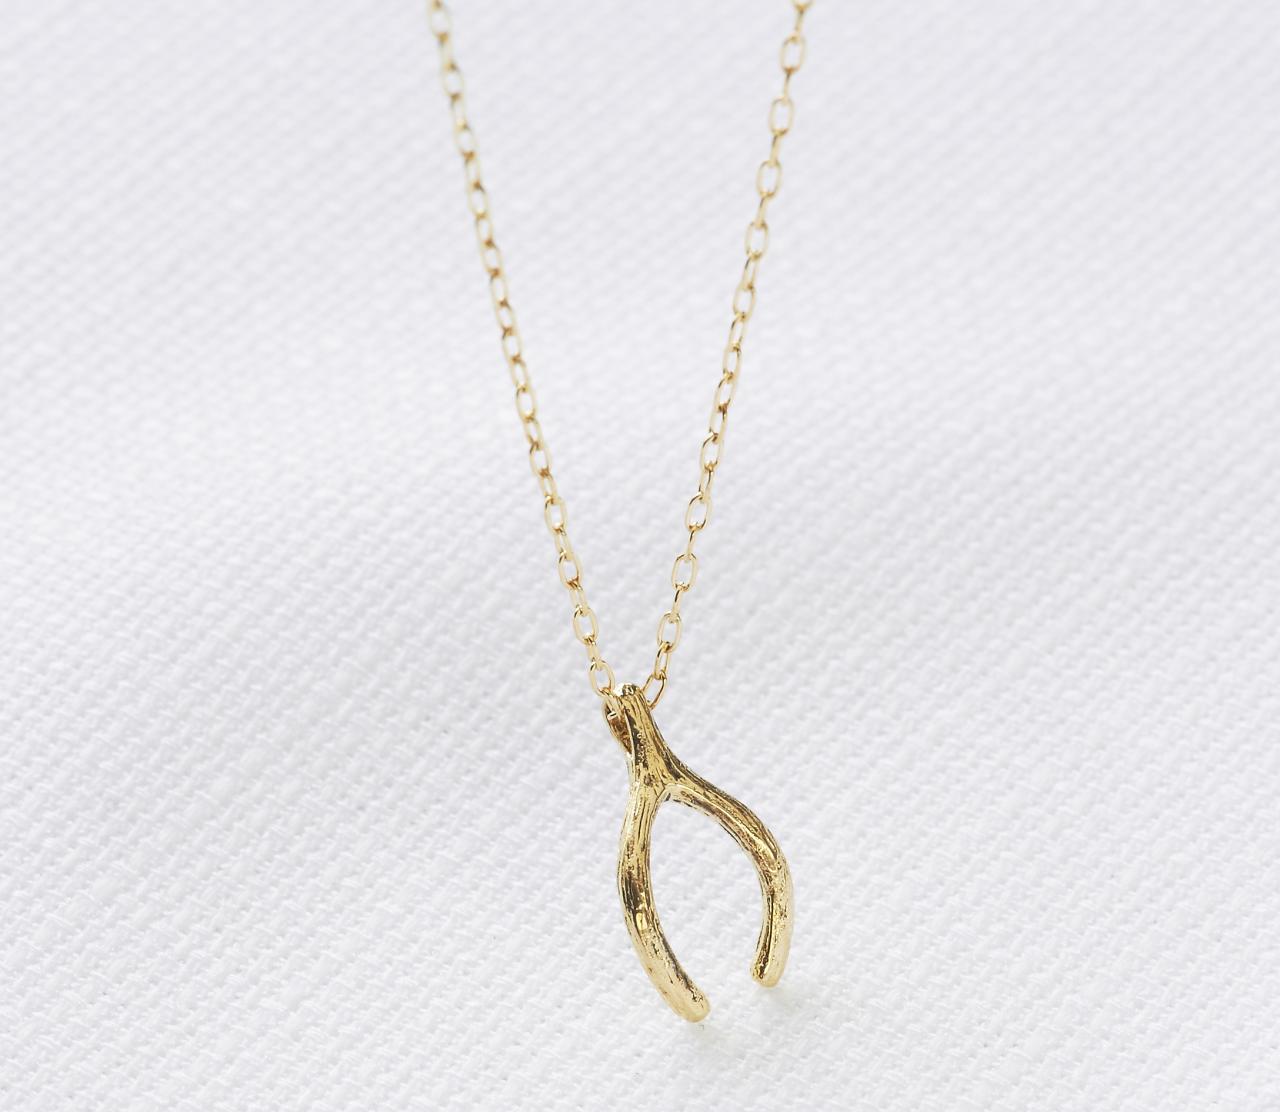 Gold Necklace, Wishbone Necklace, Lucky Pendant, Gold Wishbone Necklace, Bridesmaids Gift, Simple Gold Necklace, Gold Jewelry, Gift Idea